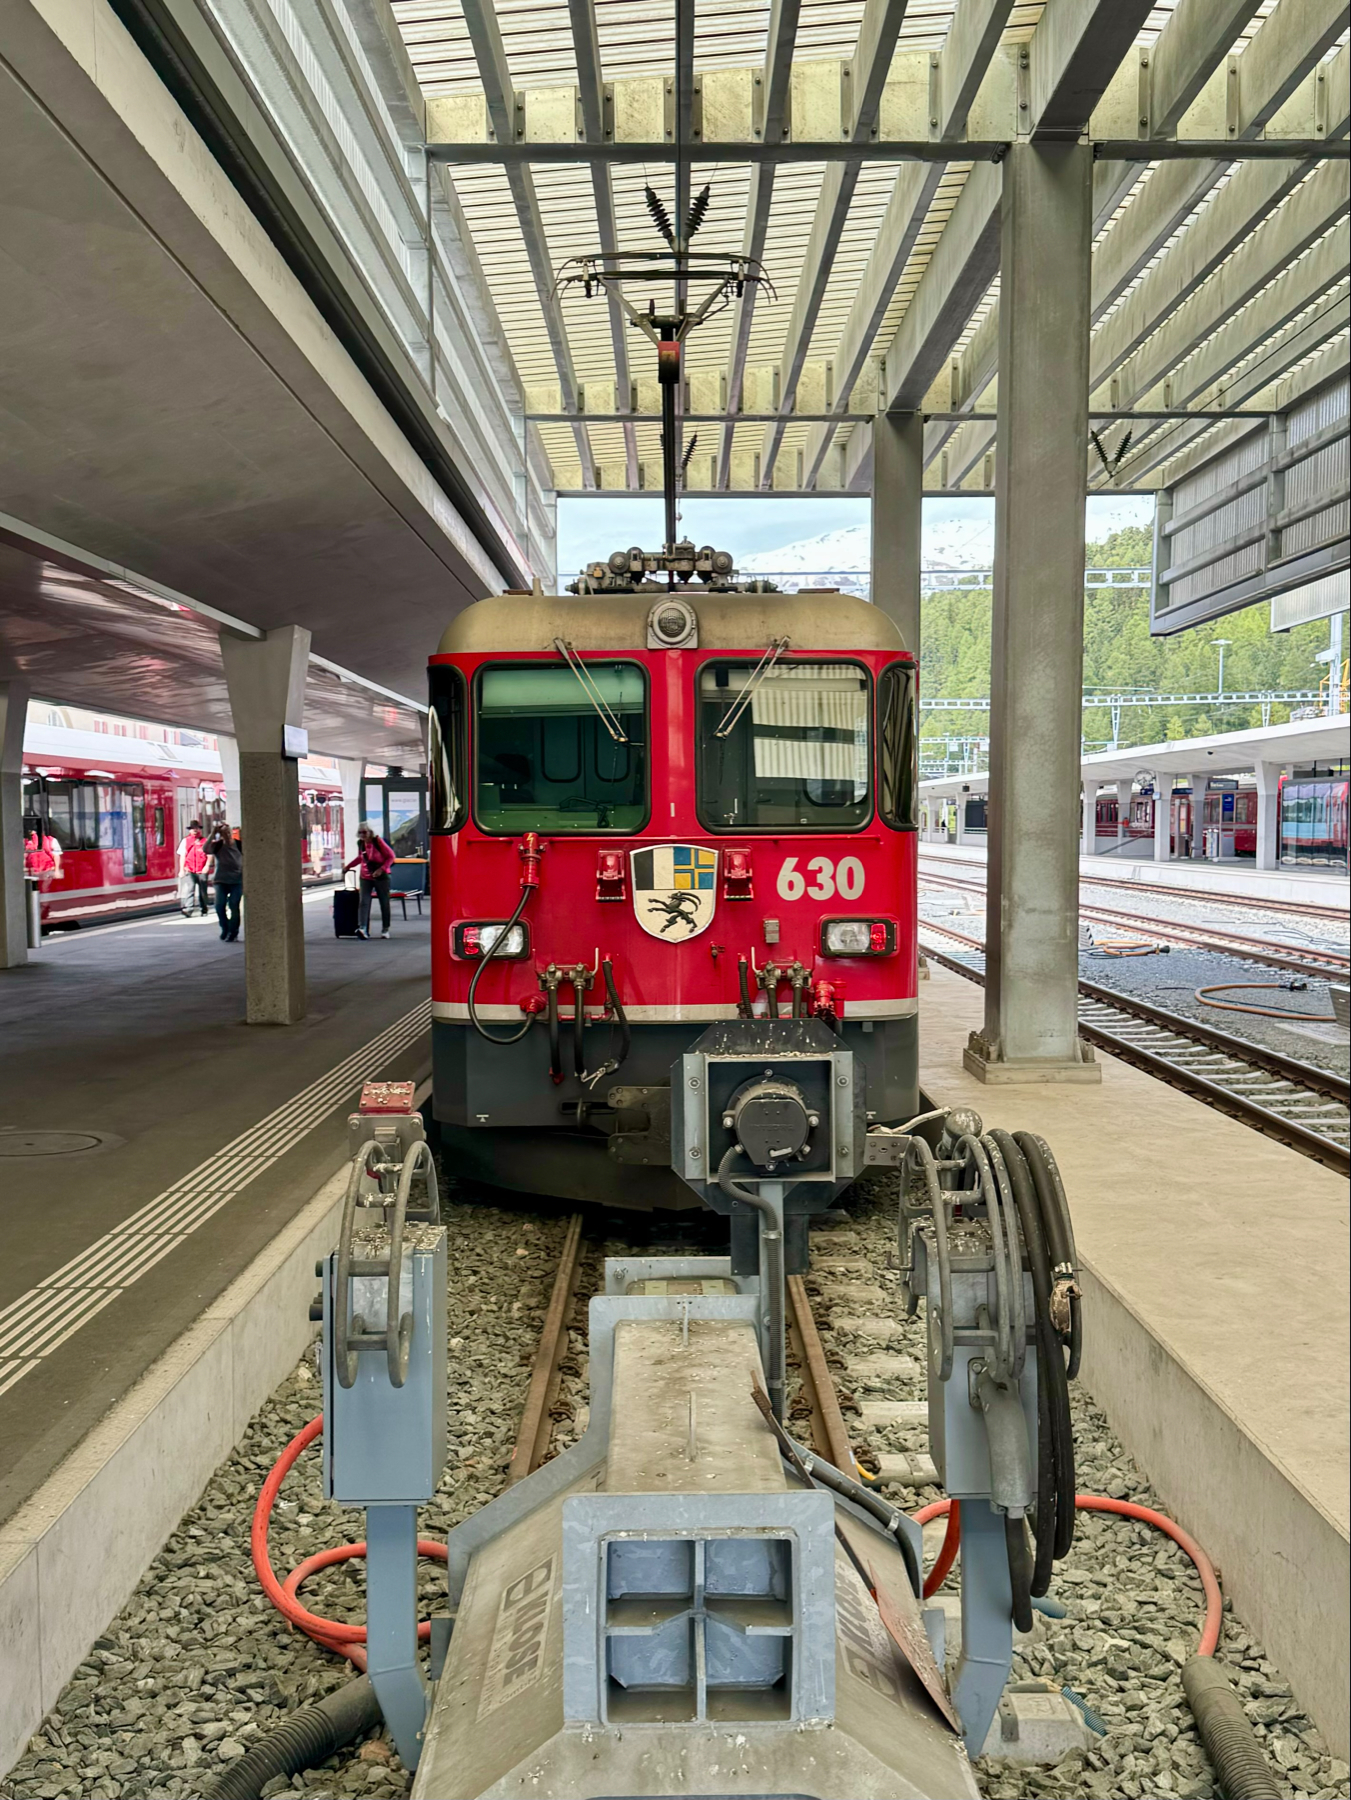 A red and white electric train at a platform with overhead power lines, a pantograph raised to connect with the electric supply, and other trains in the background.